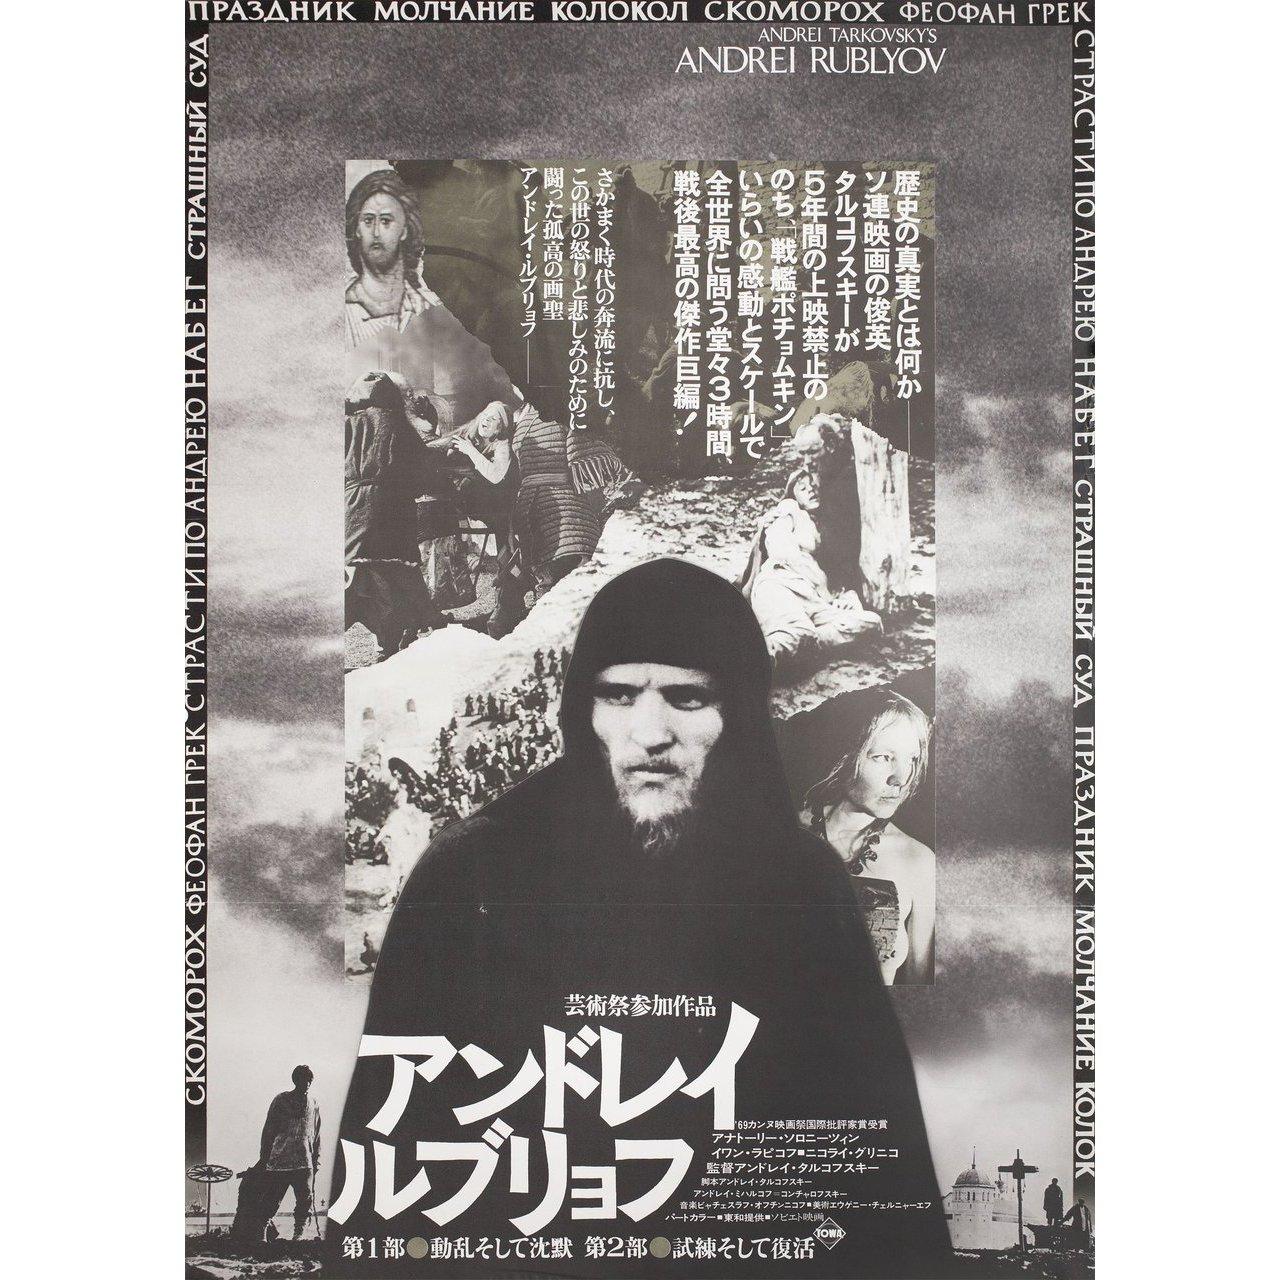 andrei rublev poster